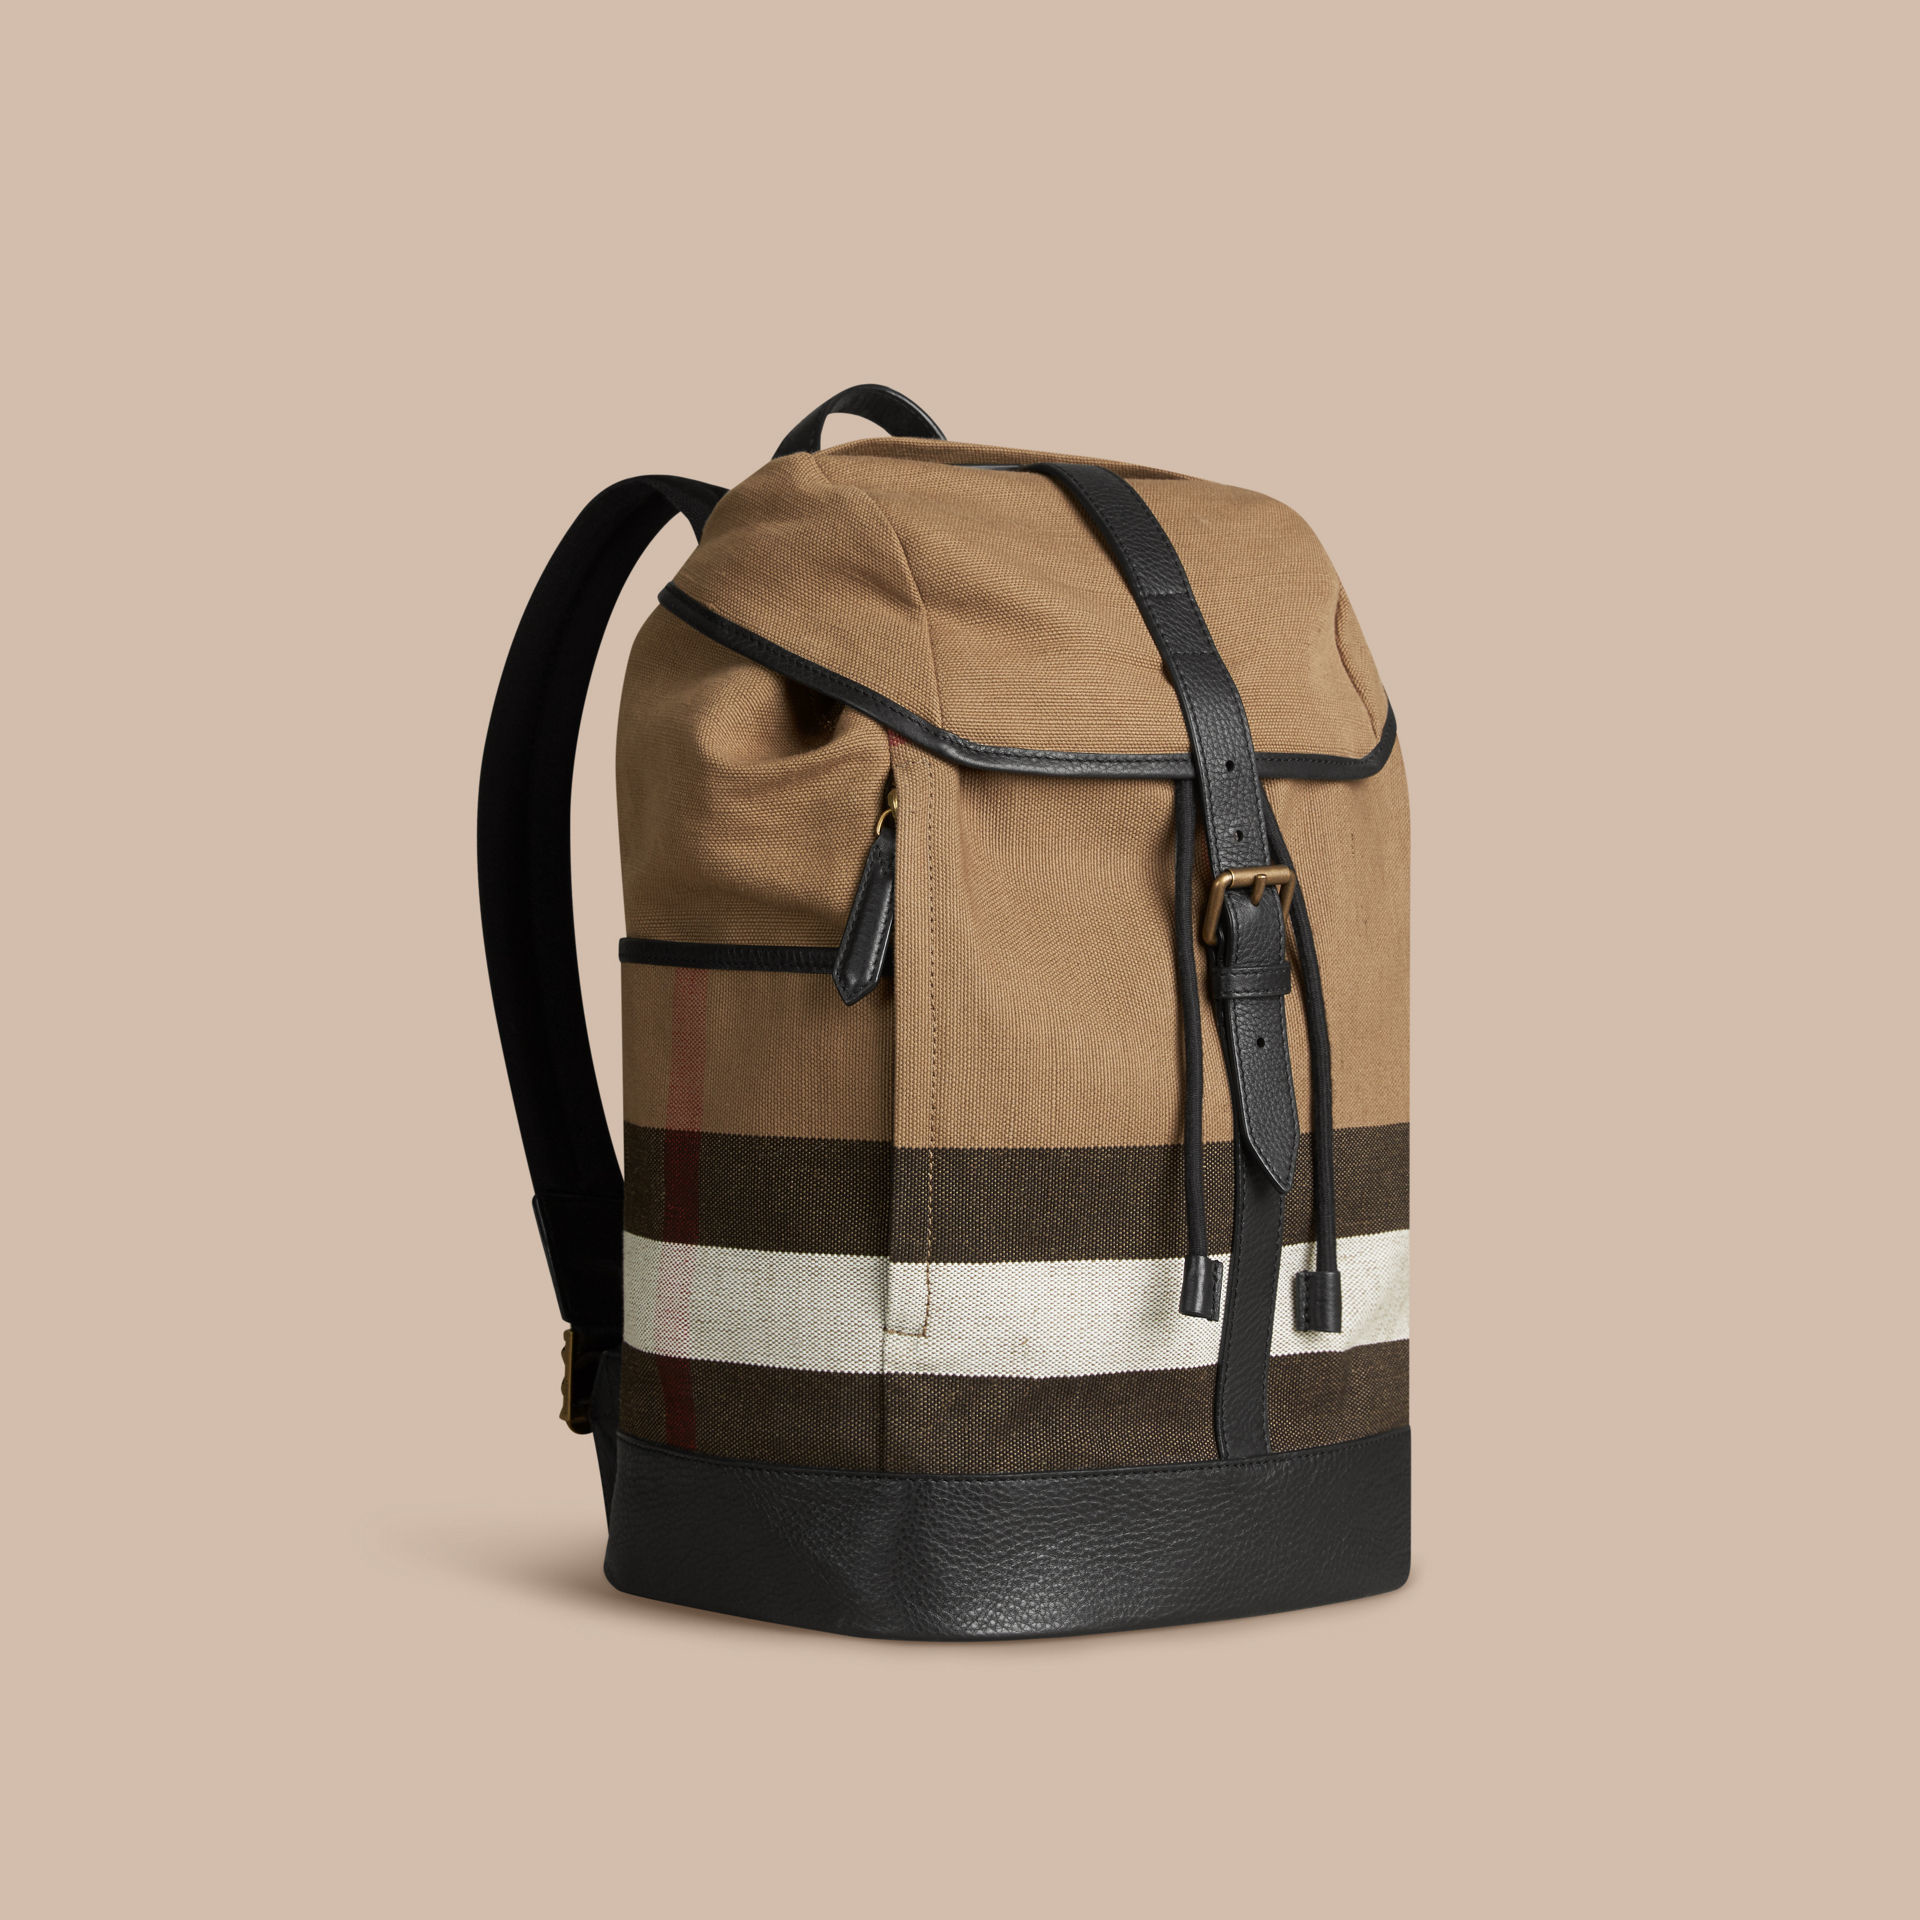 Burberry Canvas Check Backpack in Camel (Natural) for Men - Lyst